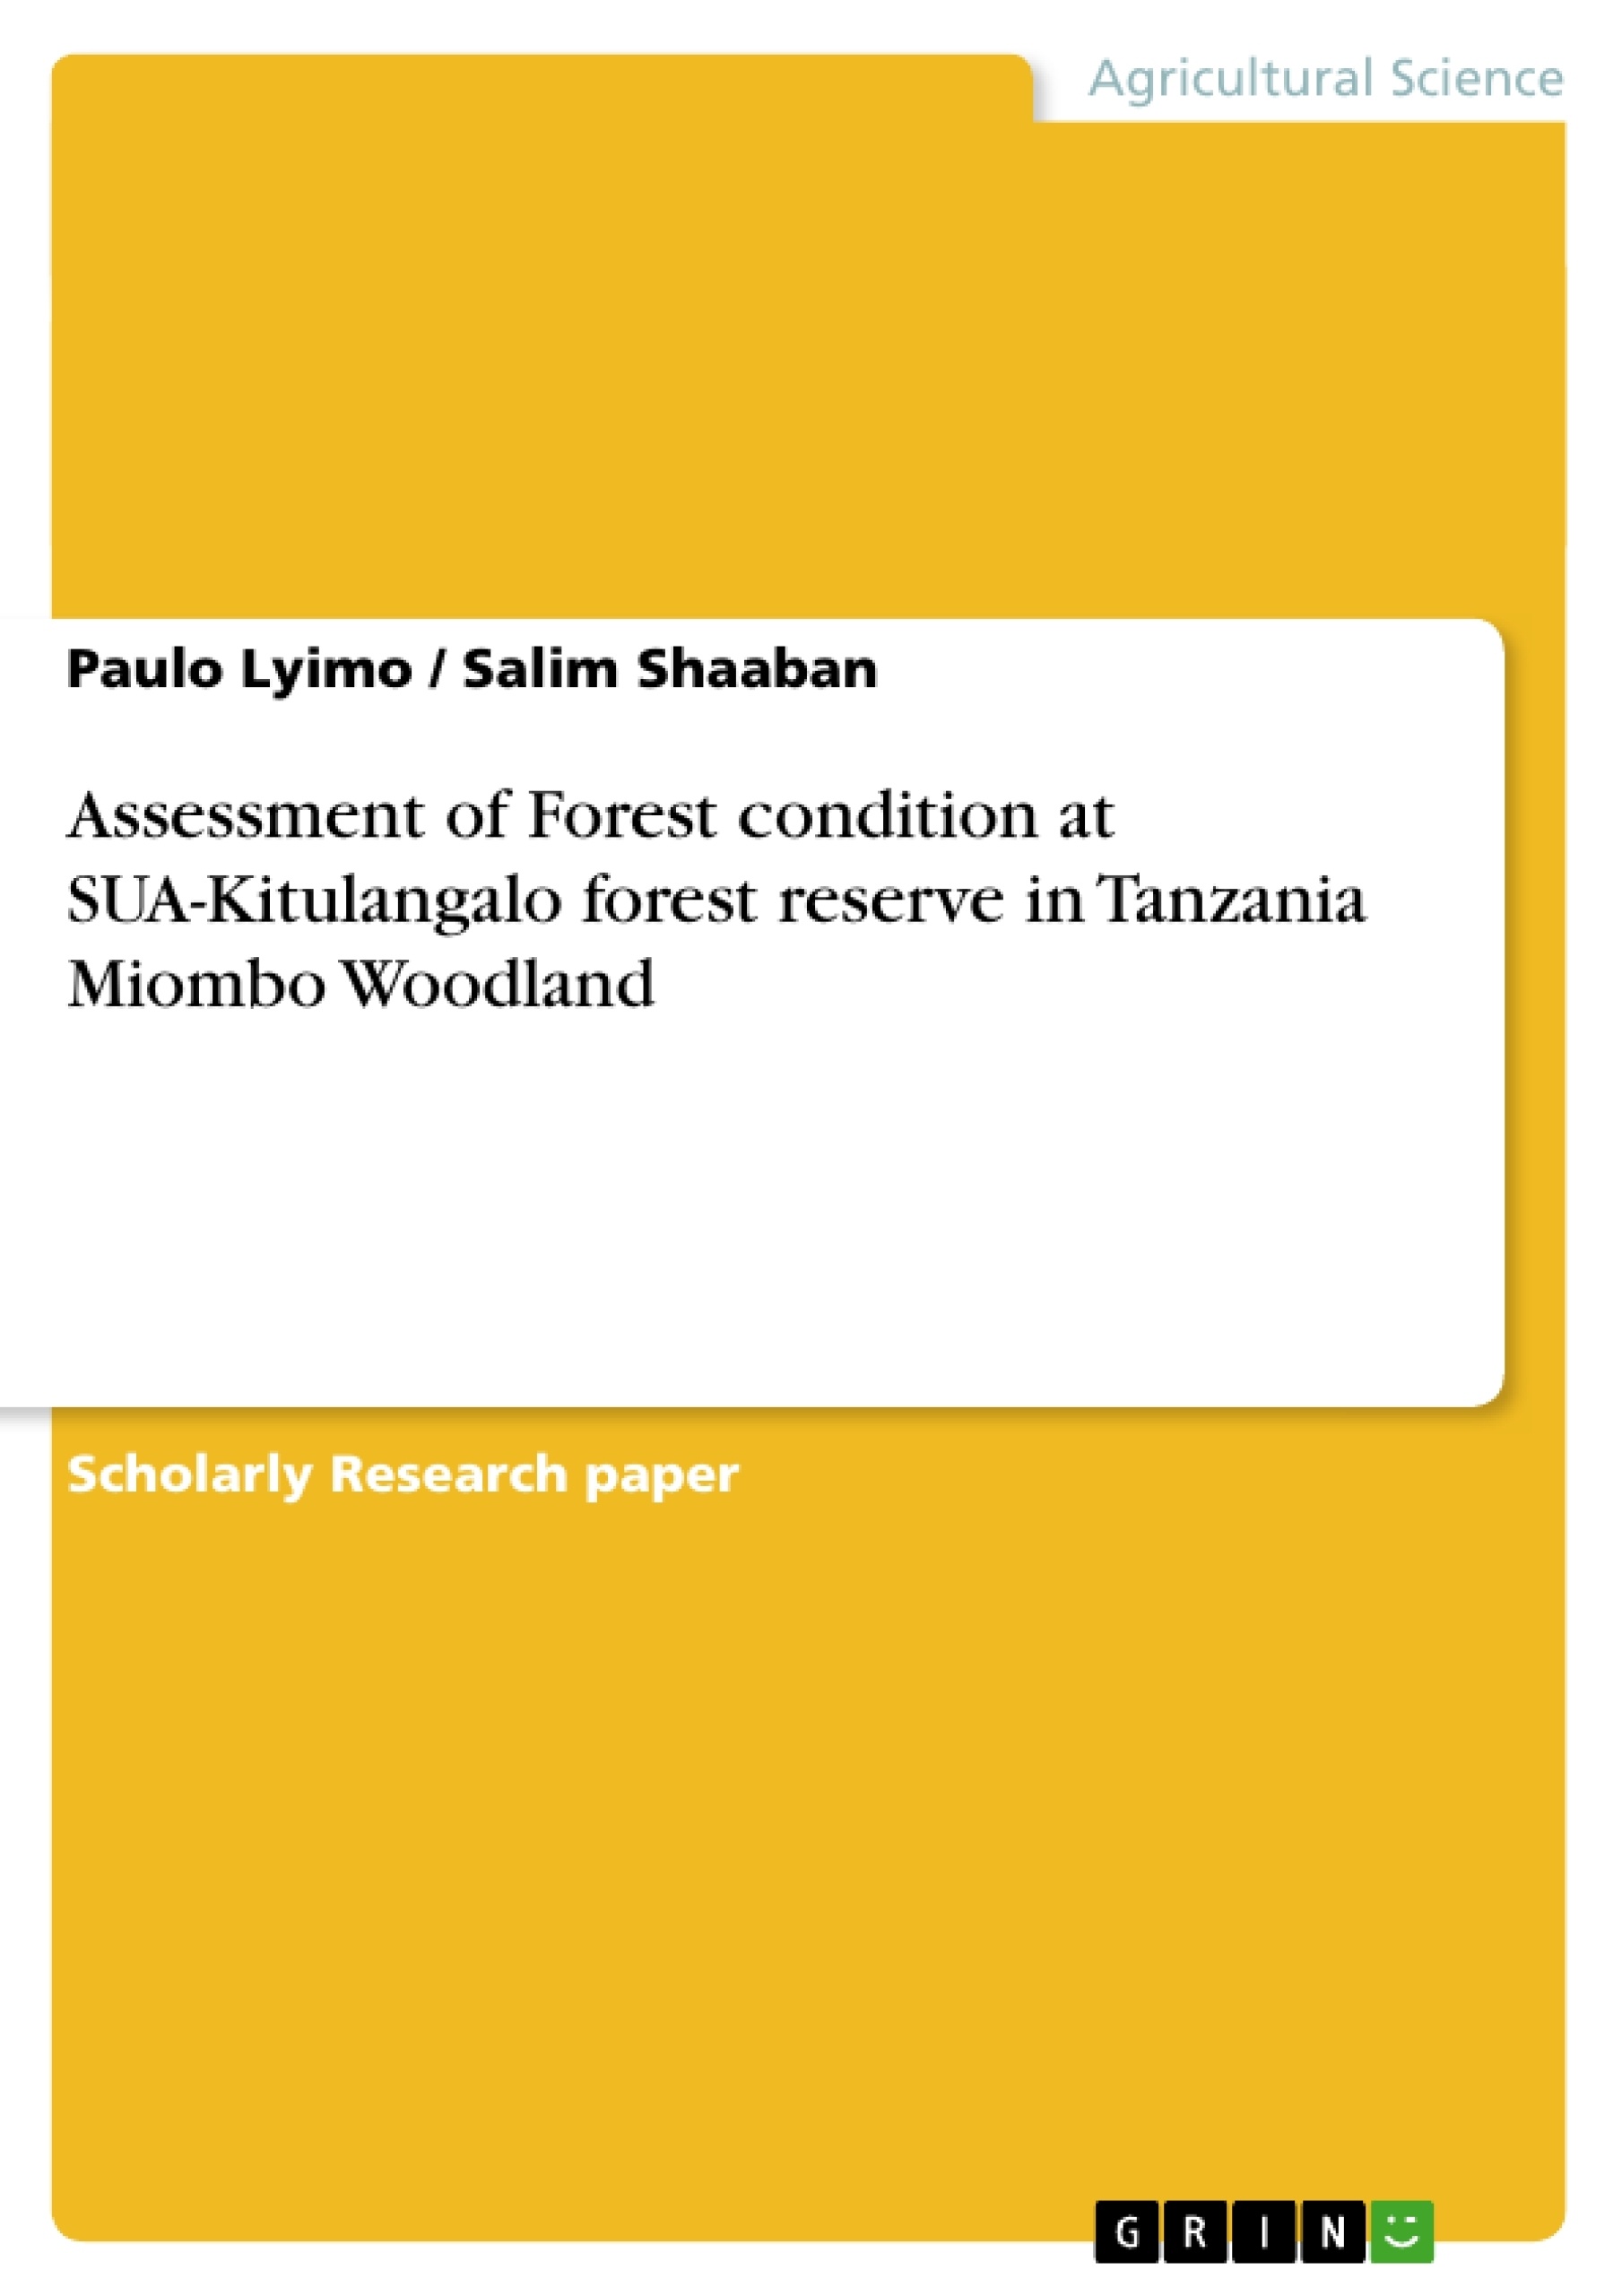 Title: Assessment of Forest condition at SUA-Kitulangalo forest reserve in Tanzania Miombo Woodland